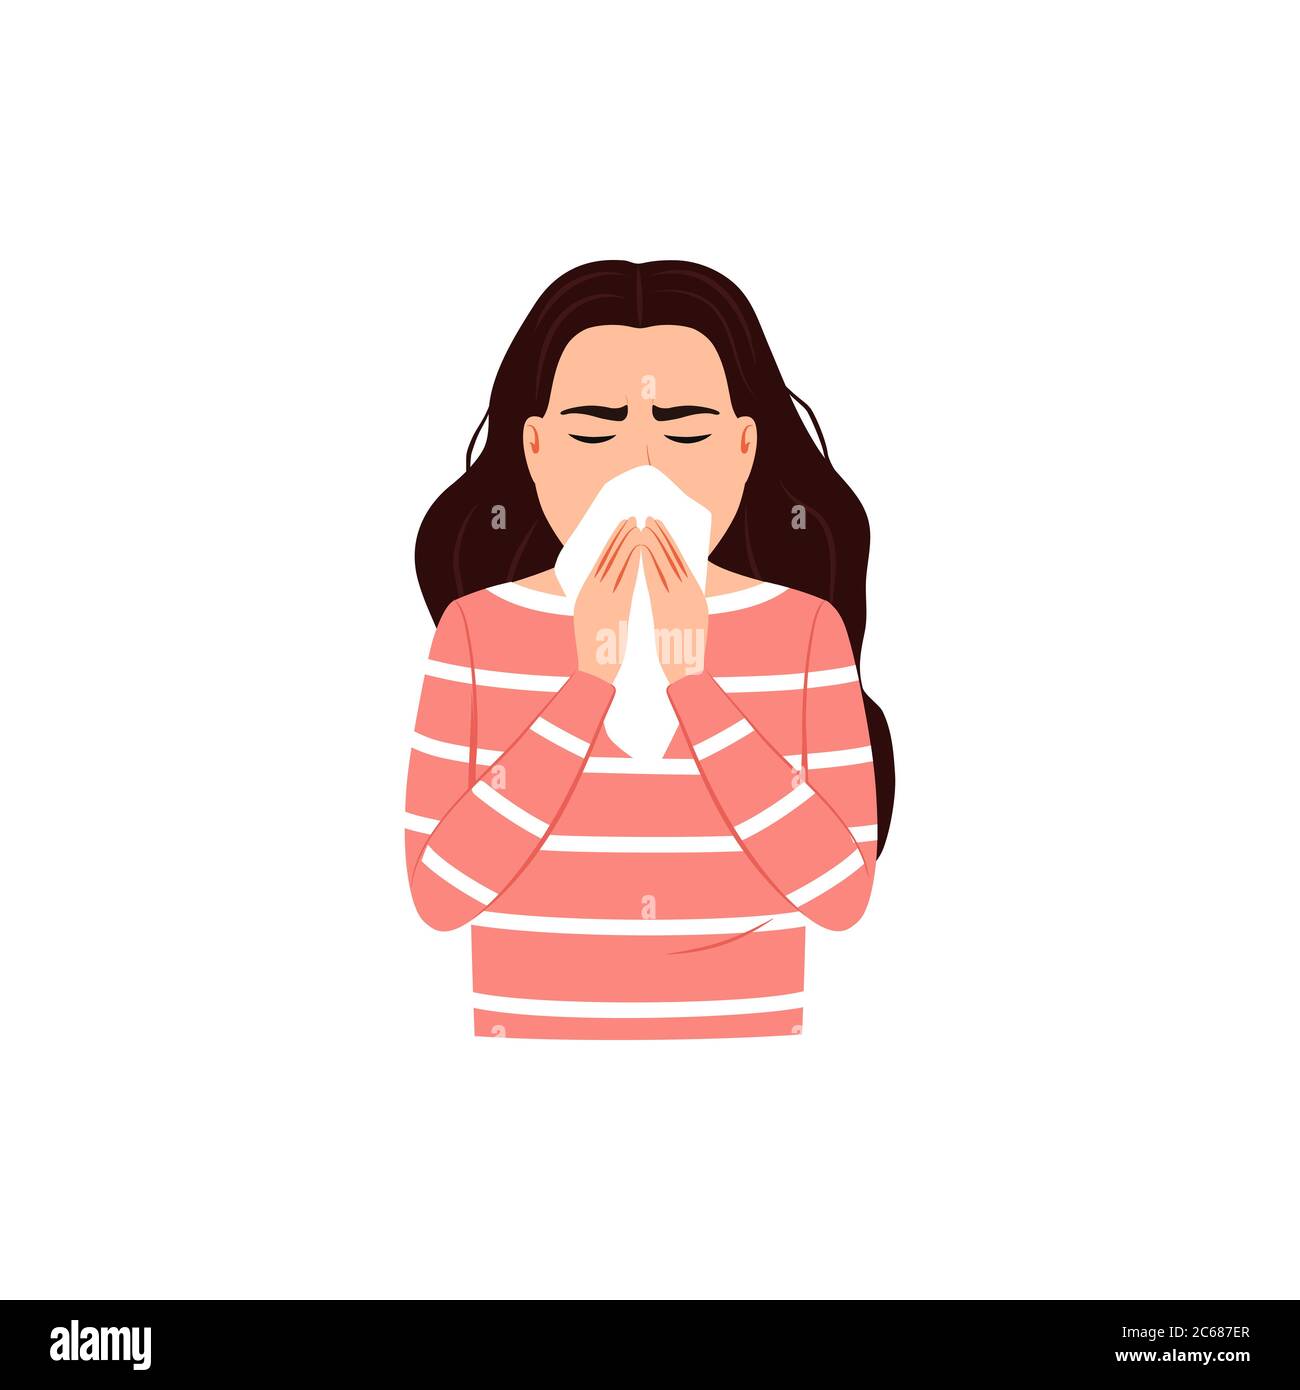 Sneezing woman covers mouth and nose with tissue on white background. Cough, sneeze into a handkerchief concept Good respiratory hygiene icon Flu viru Stock Vector